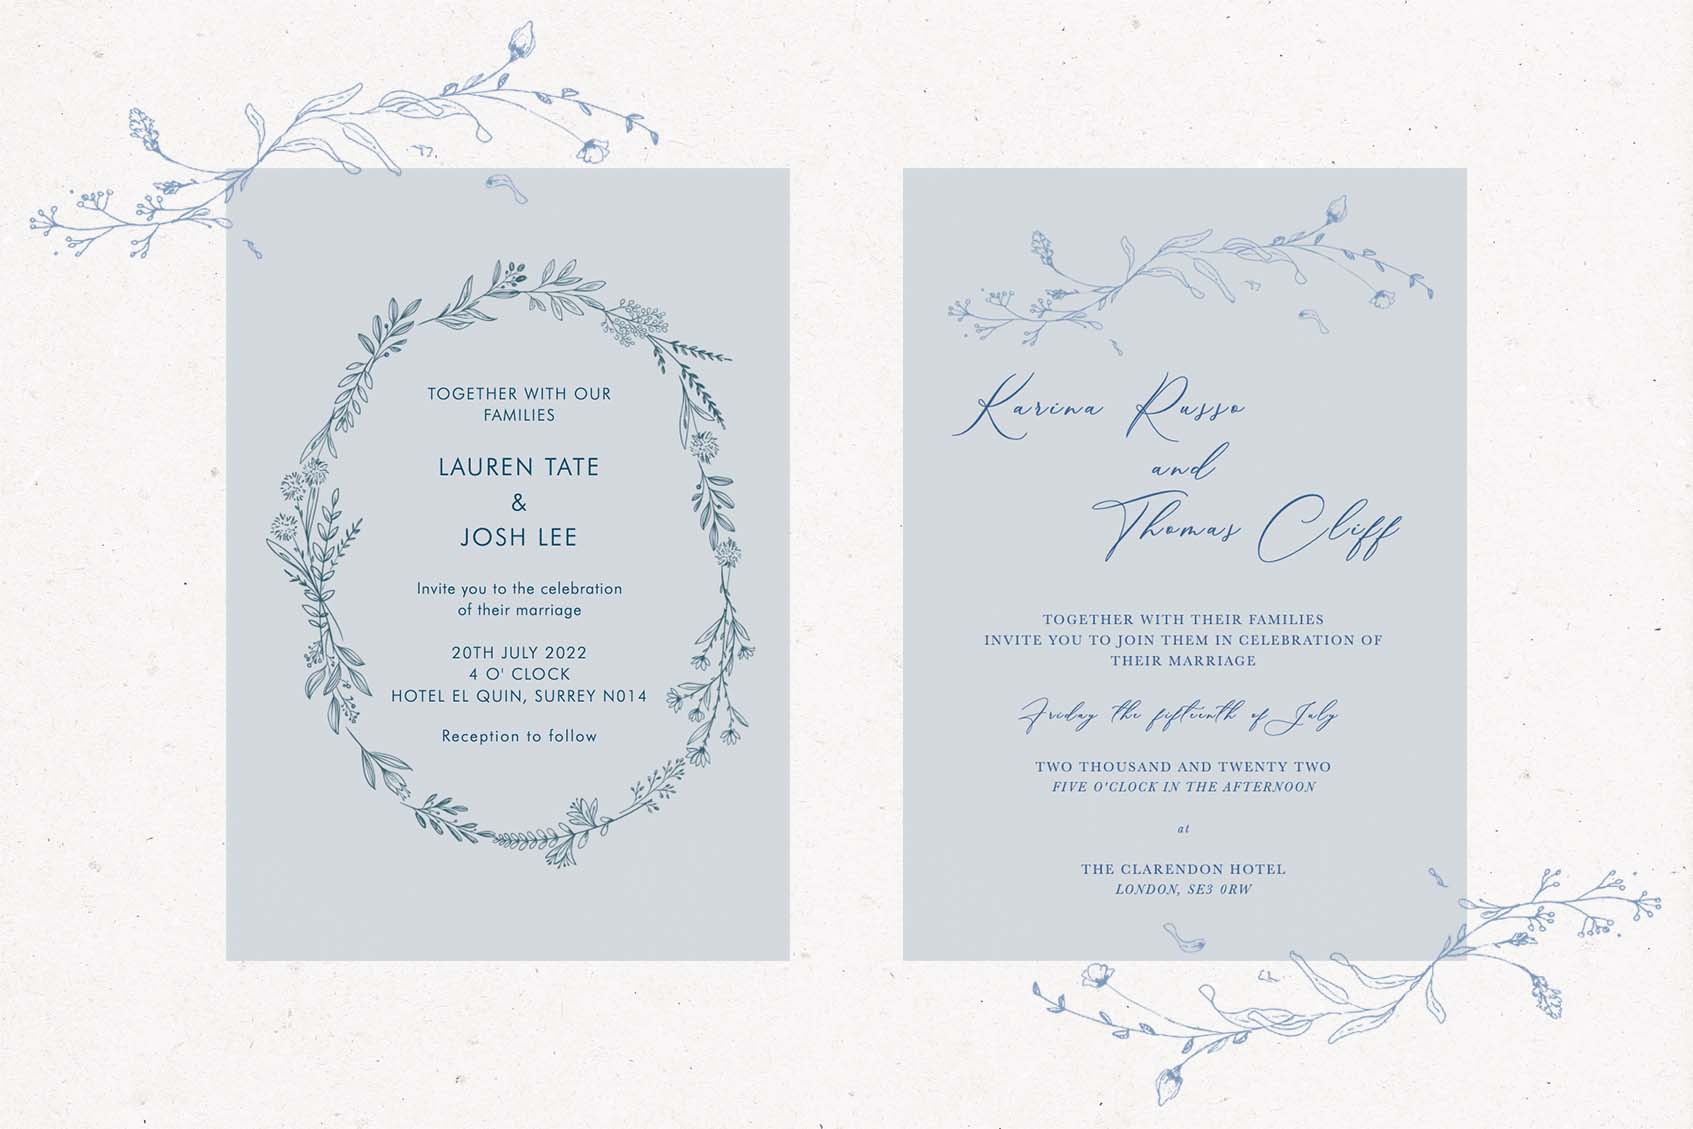 Two luxury g . f. smith wedding invitations in blue colours, with decorative floral illustrations